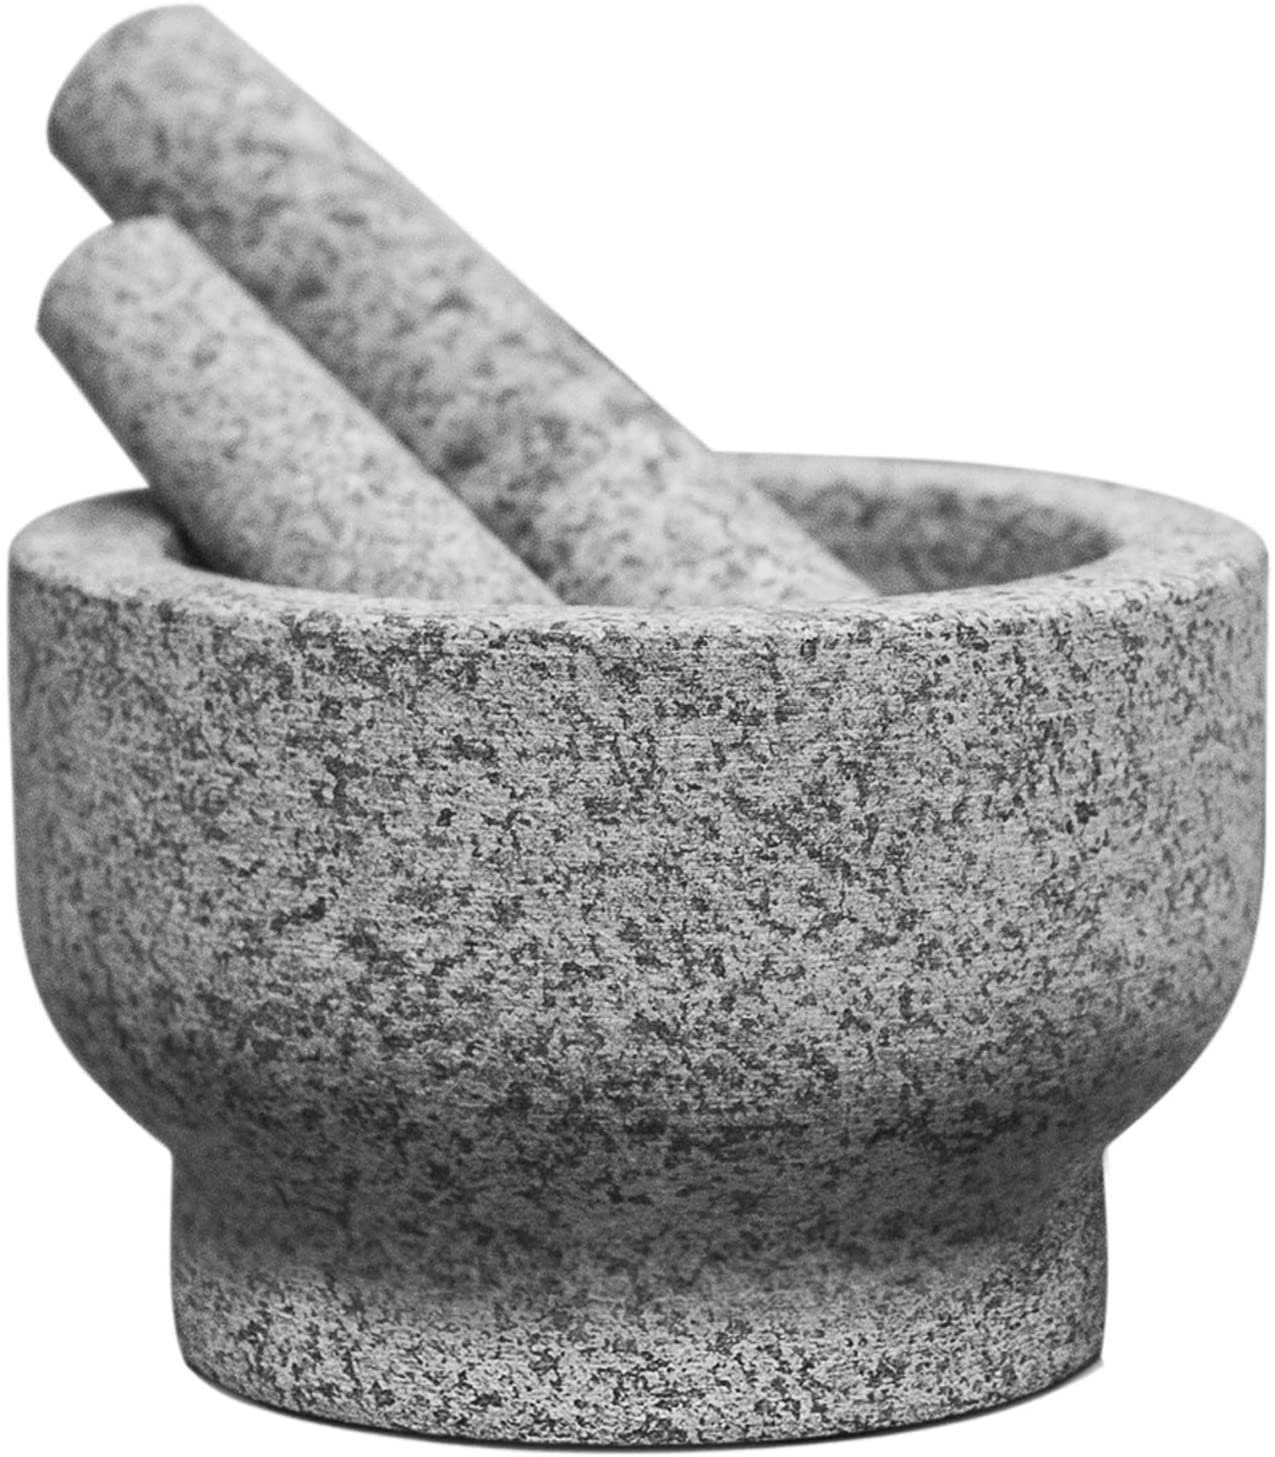 ChefSofi Mortar and Pestle Review